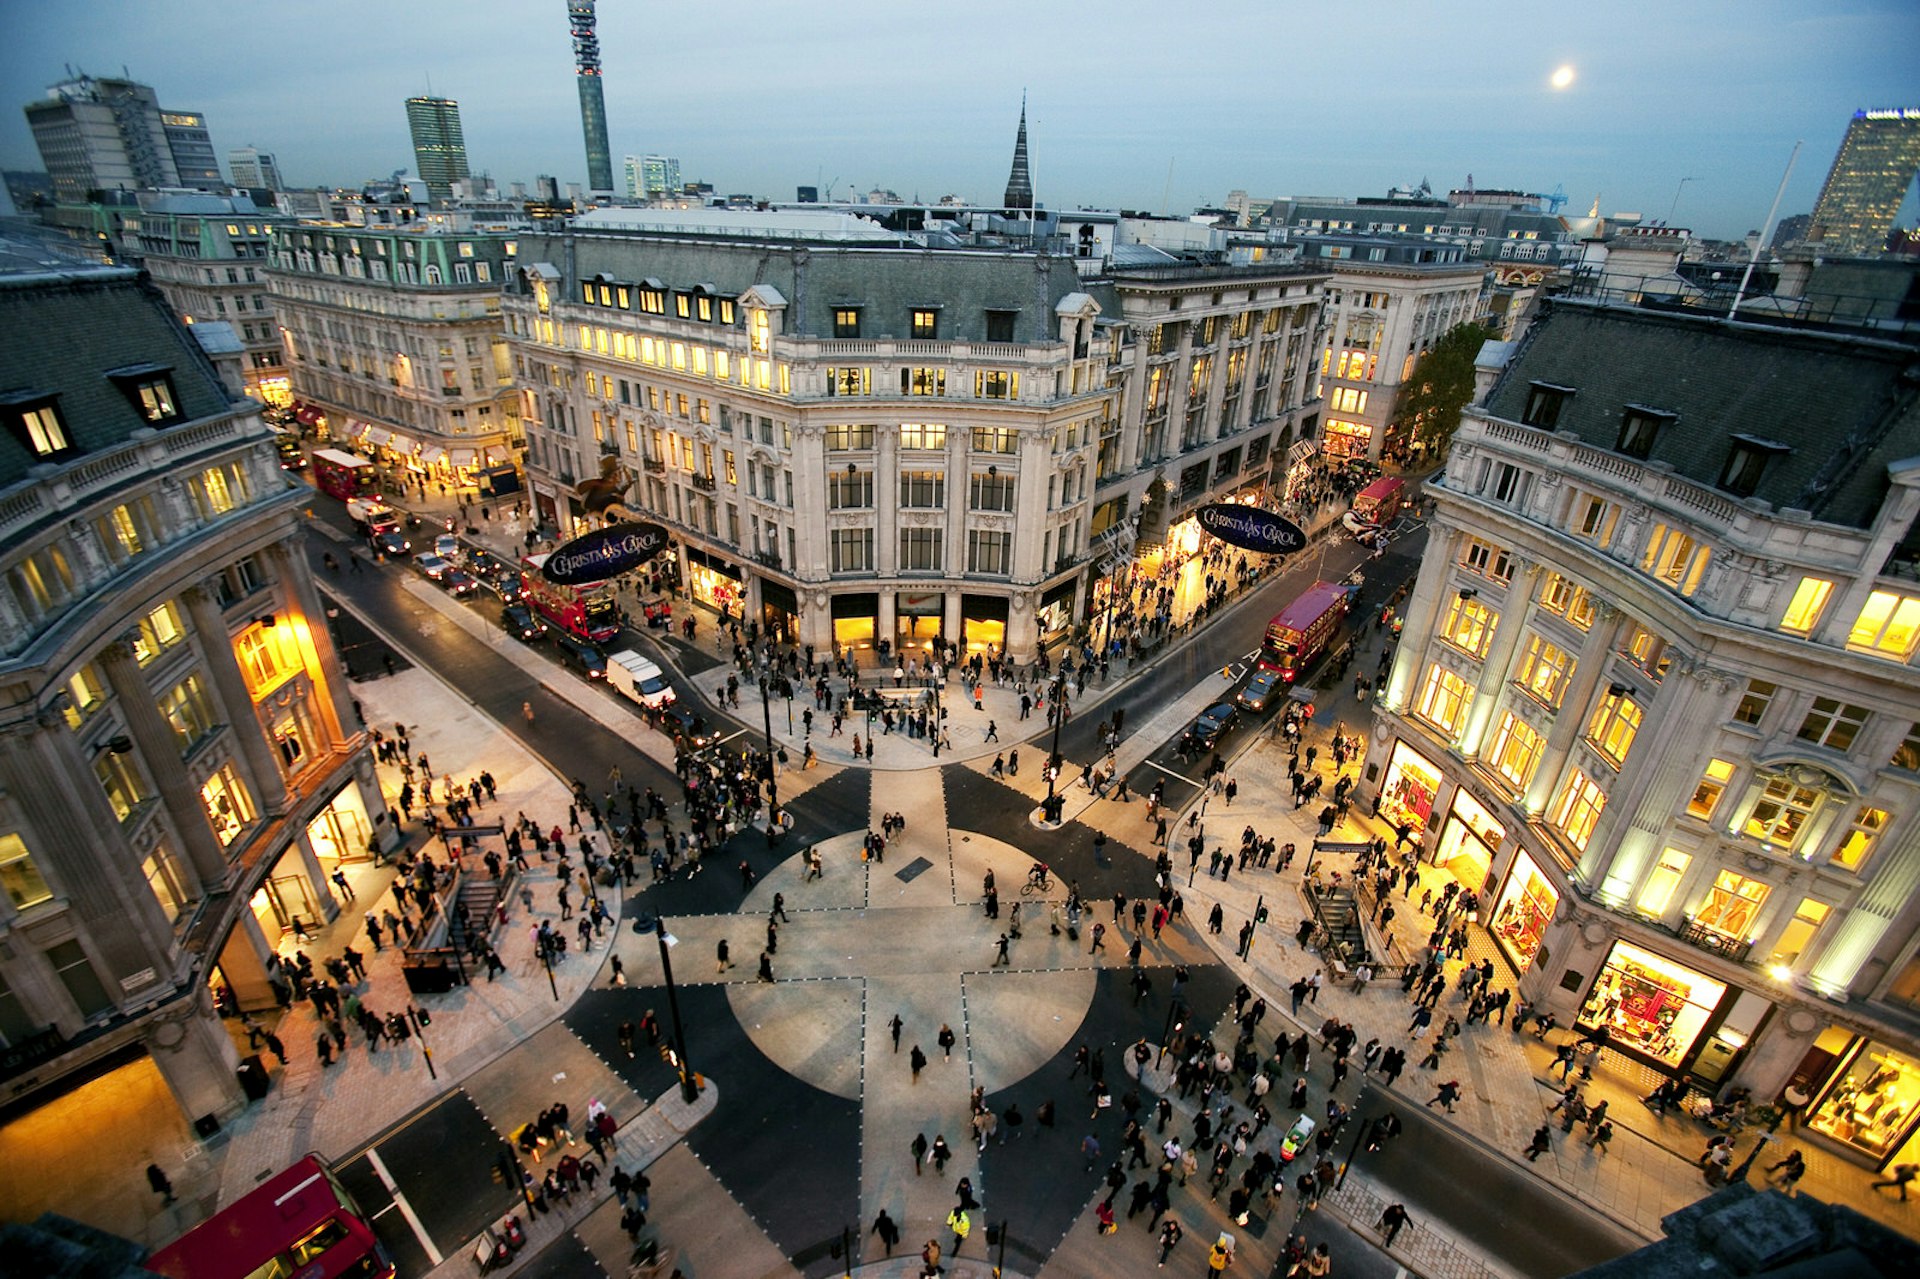 With its packed pavements, busy shops and plentiful public transport options, Oxford Circus offers some great opportunities to put our tips to the test © watchlooksee.com / Getty Images